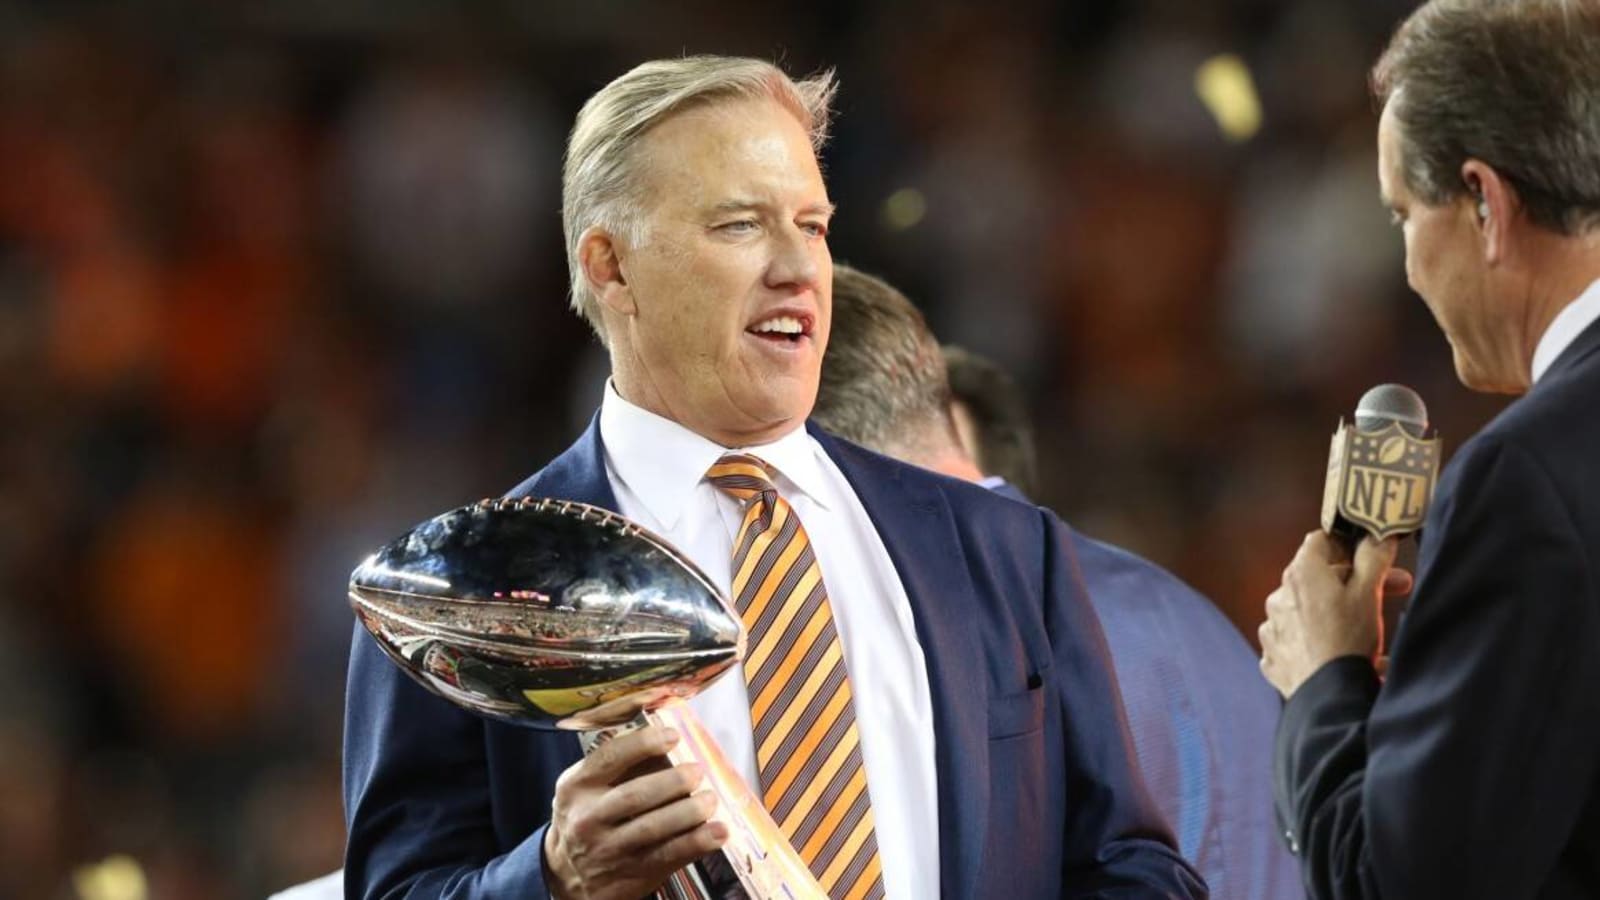 Broncos Fans React to John Elway Presenting Lombardi Trophy to Chiefs